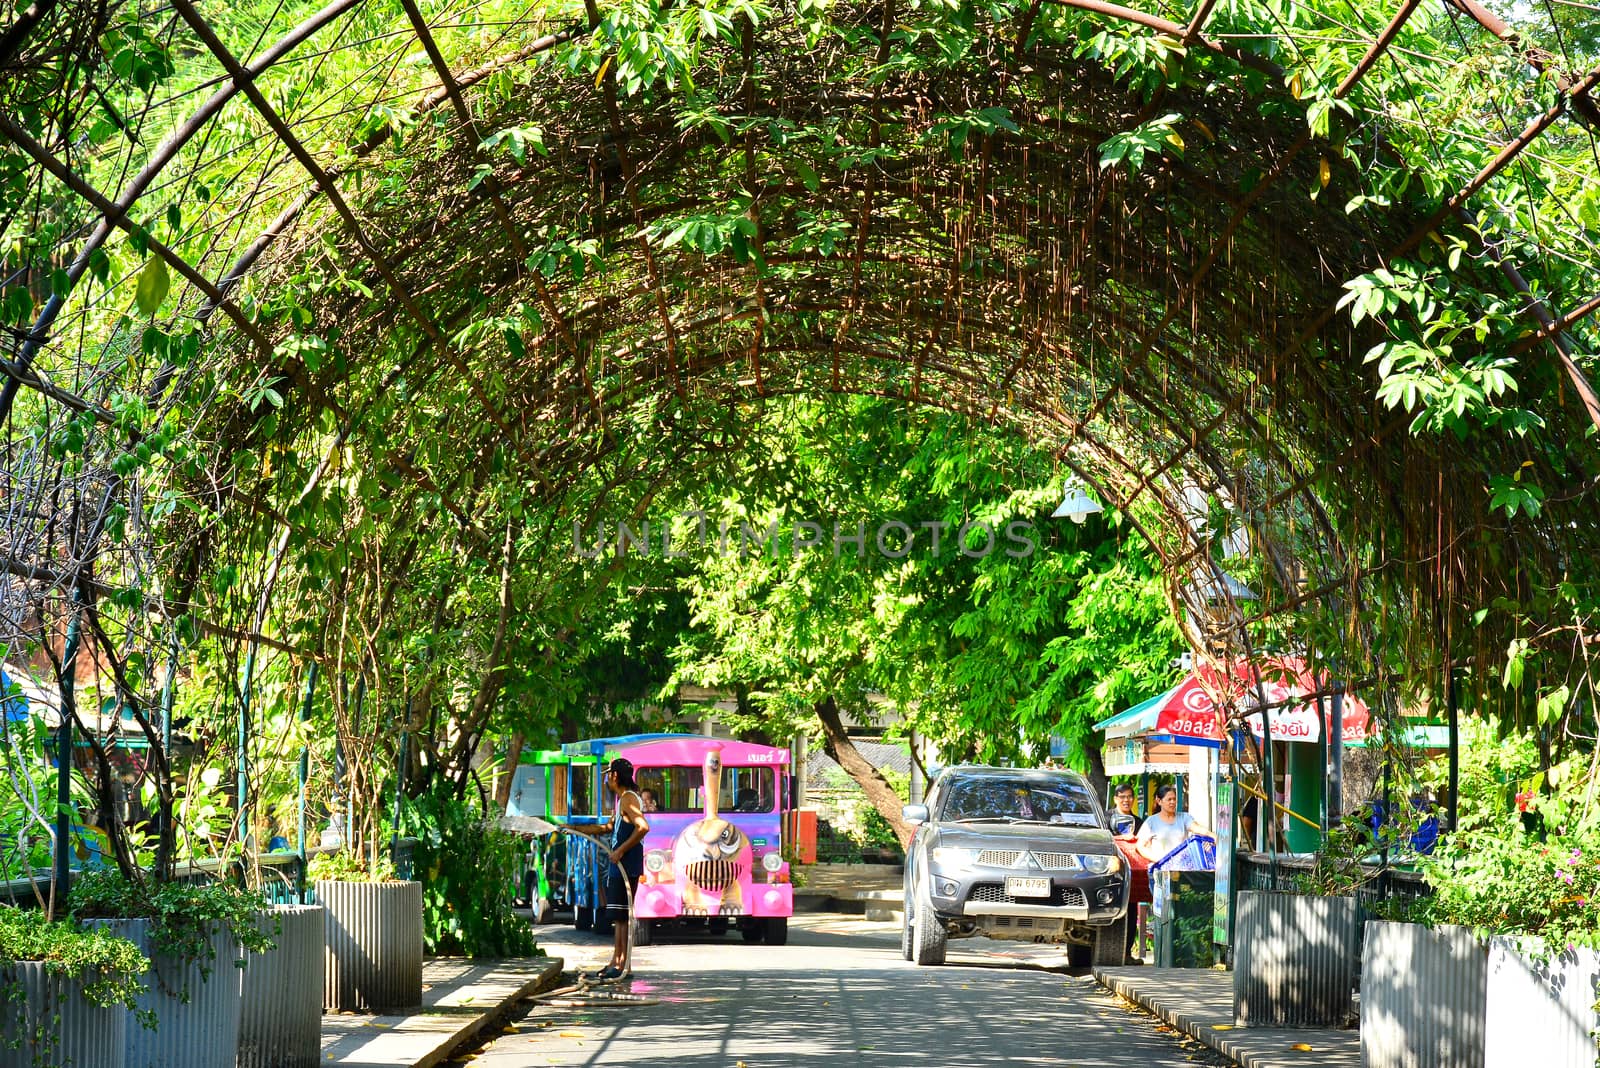 Path way with arch at Dusit Zoo in Khao Din Park, Bangkok, Thail by imwaltersy